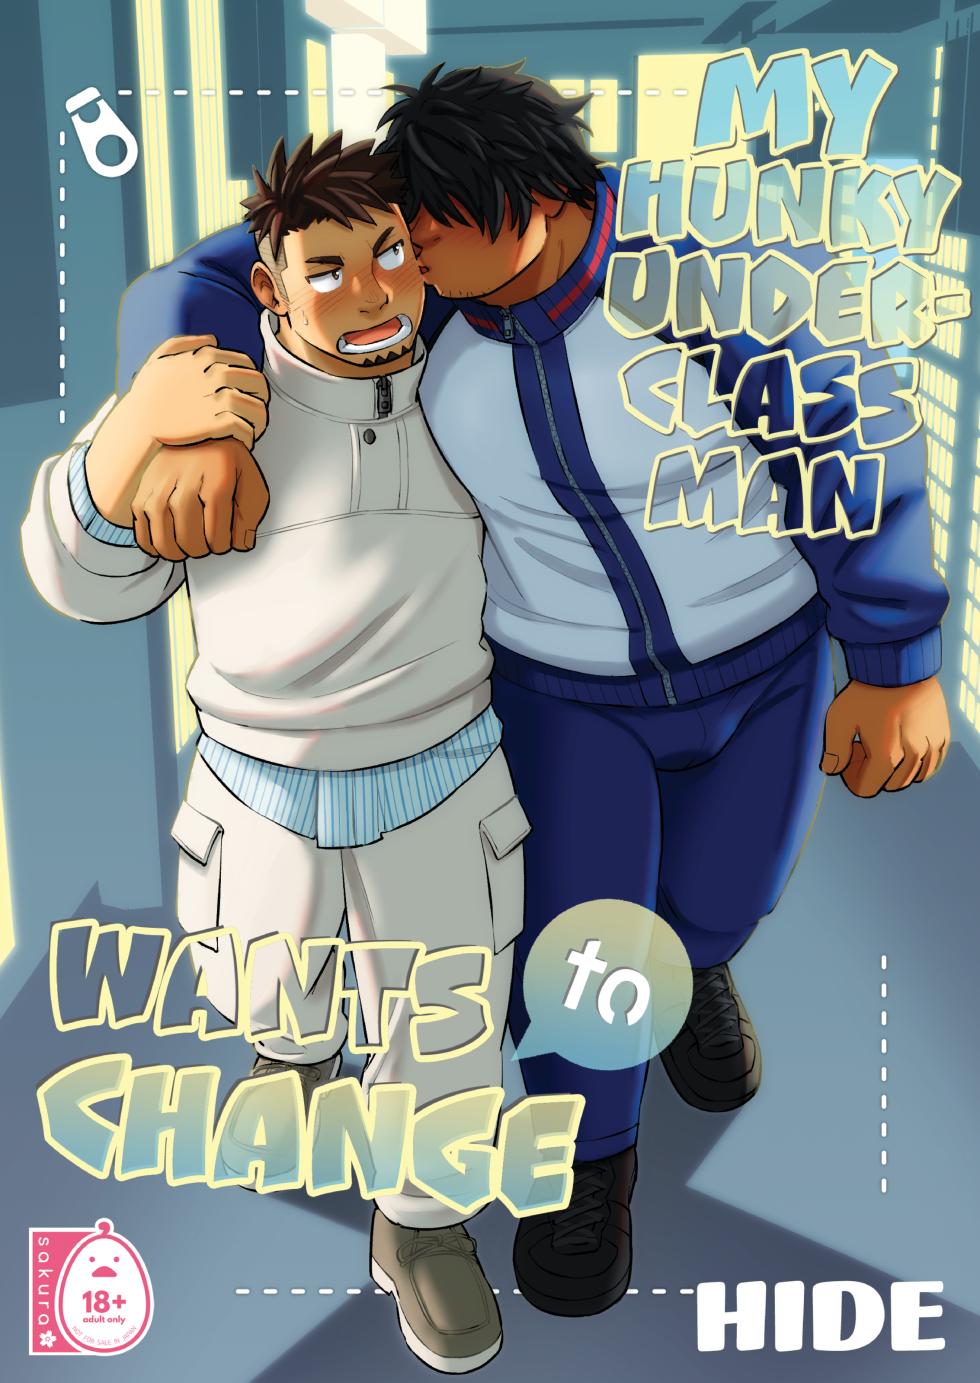 My Hunky Underclassman Wants to Change - Page 1